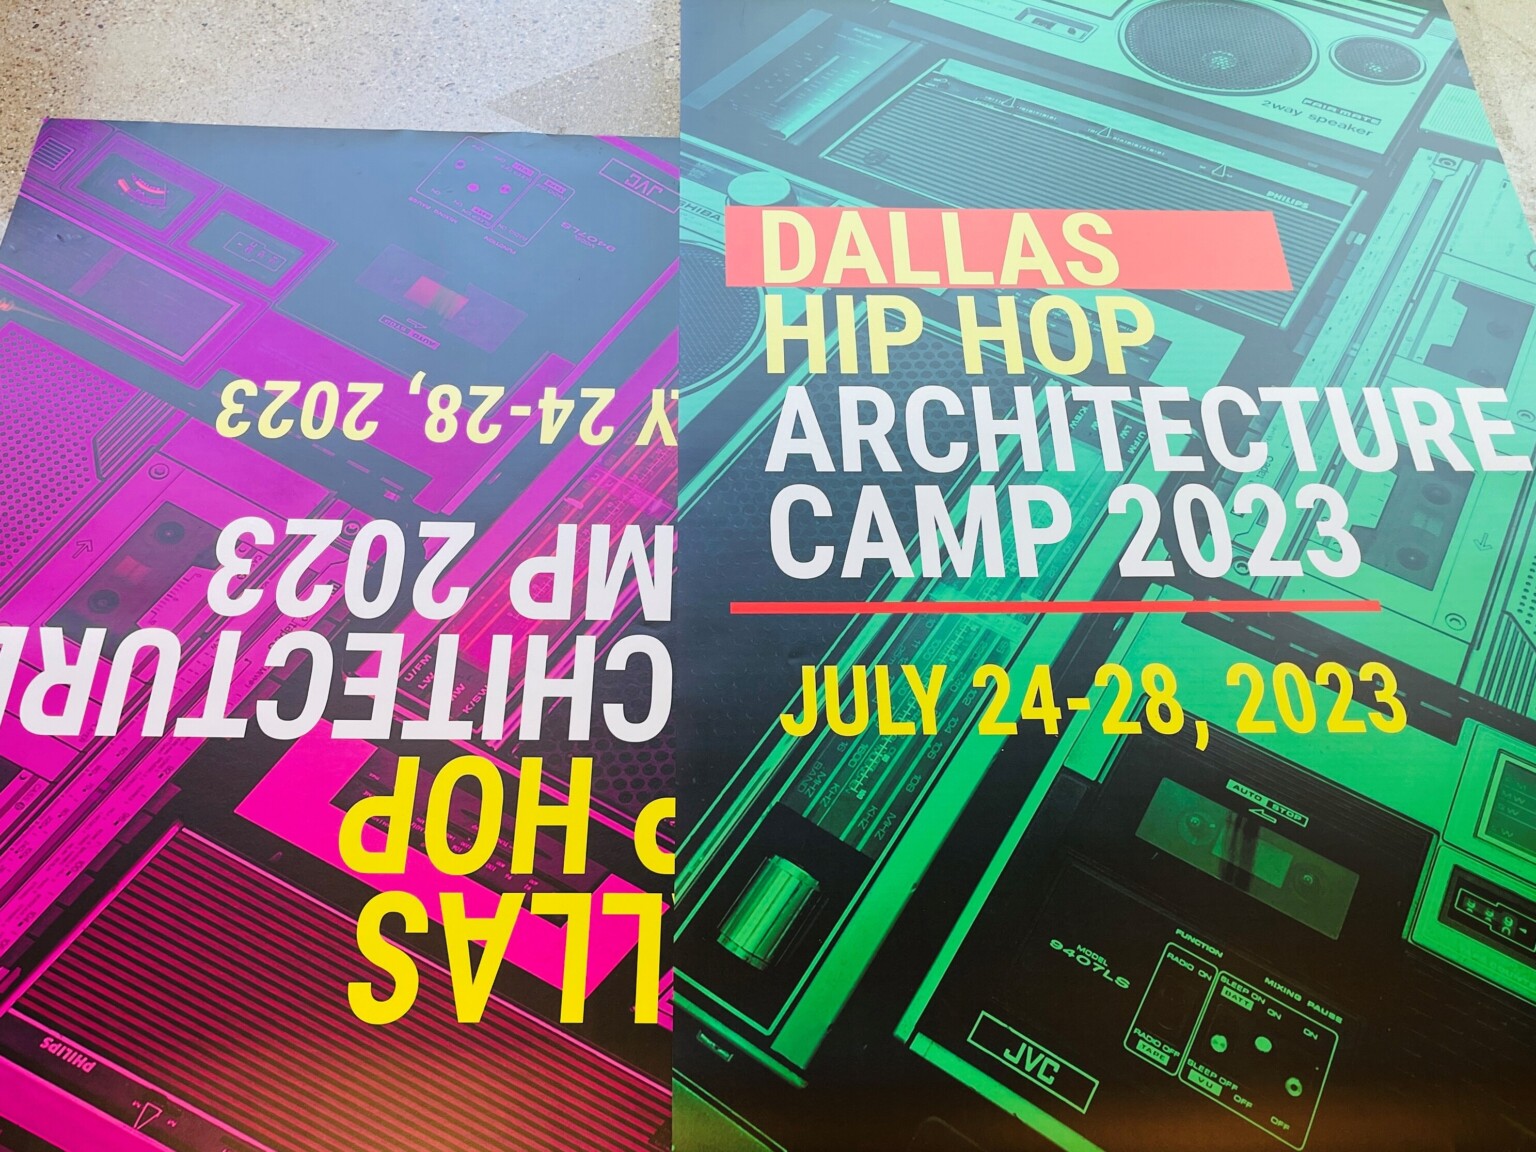 Flyers for Hip Hop Architecture Camp in Dallas with bold vibrant graphics